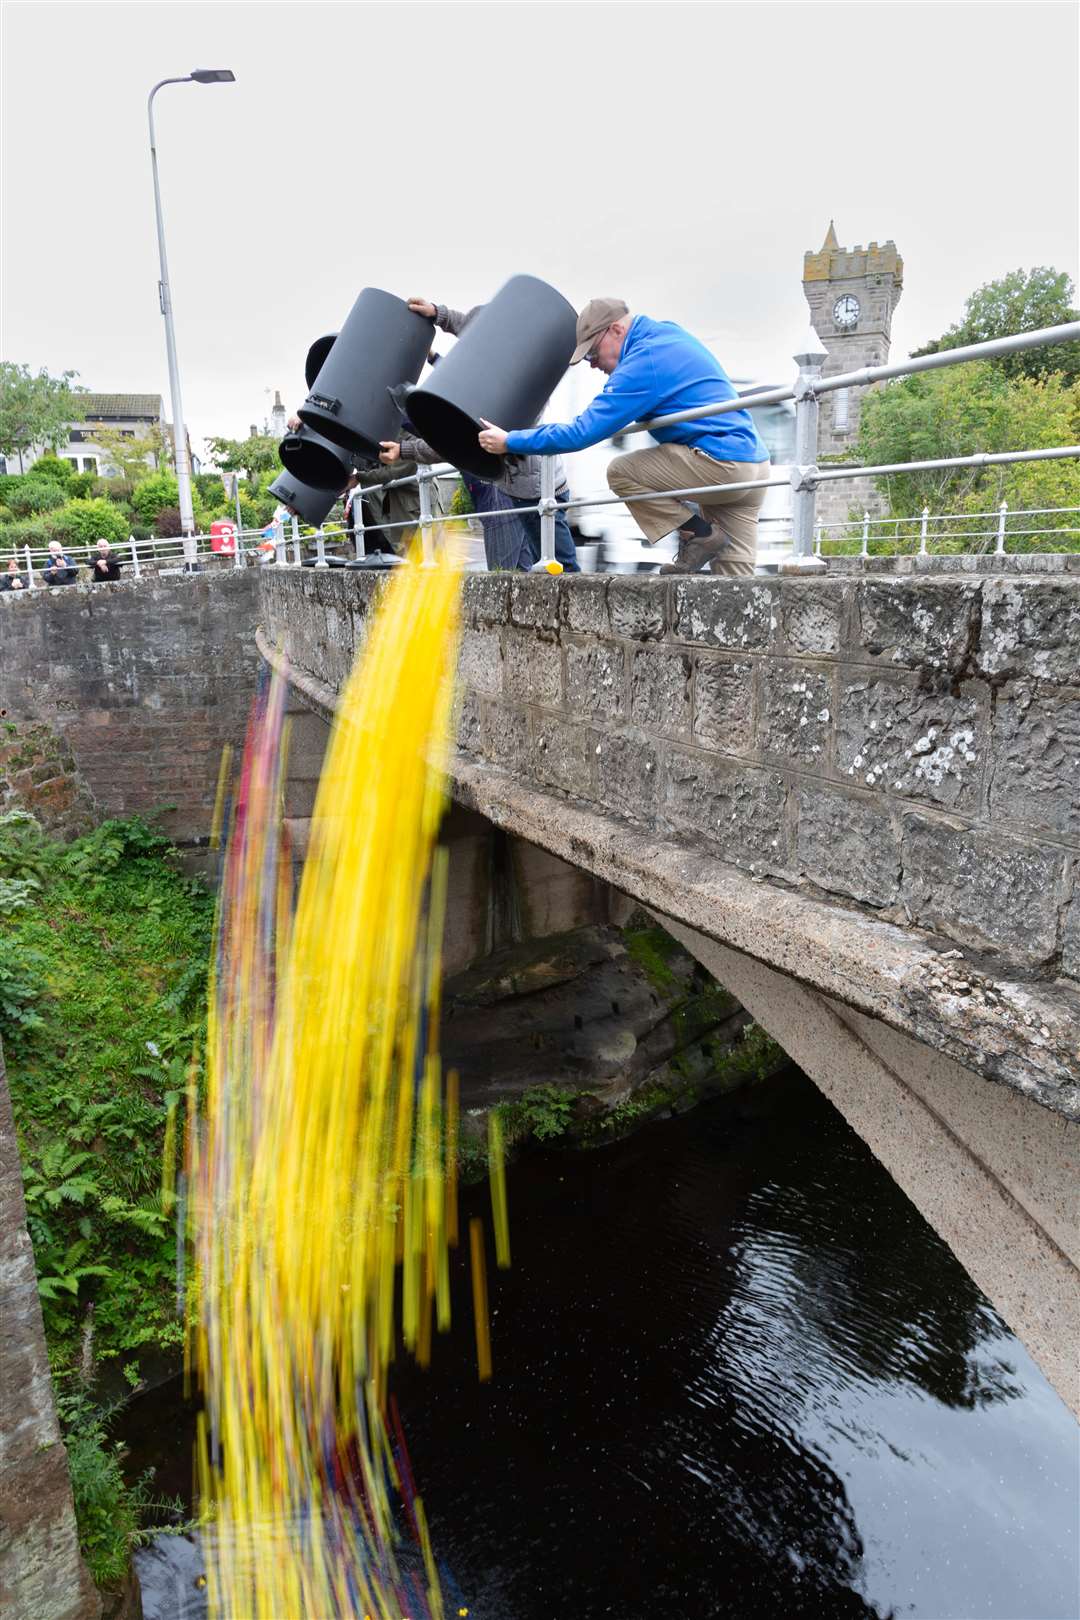 A total of 2,400 ducks are tipped over the bridge at Brora and into the river. They will later be collected by kayakers.